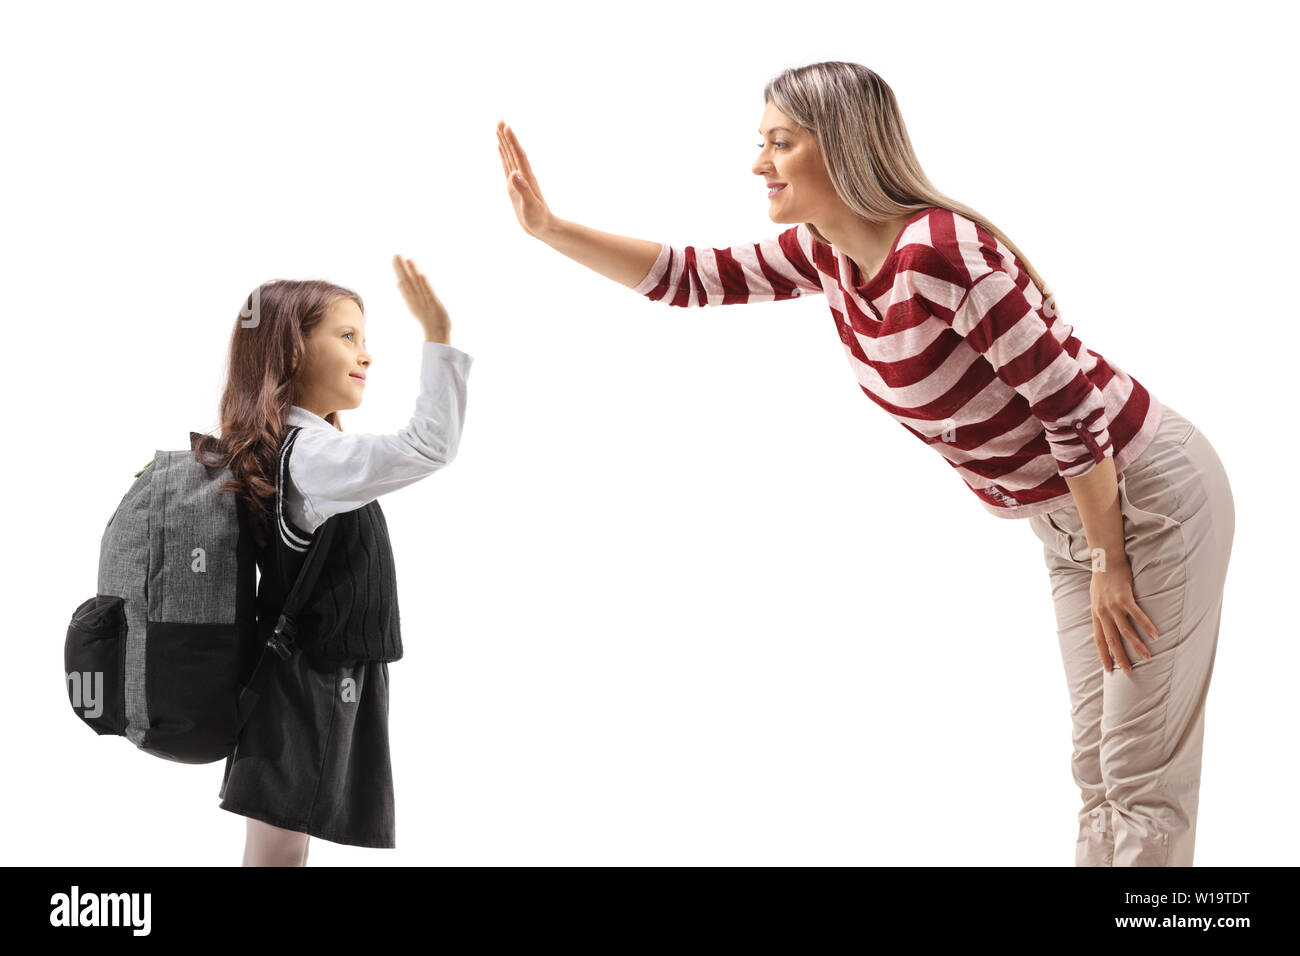 Schoolgirl high-fiving with a young woman isolated on white background Stock Photo